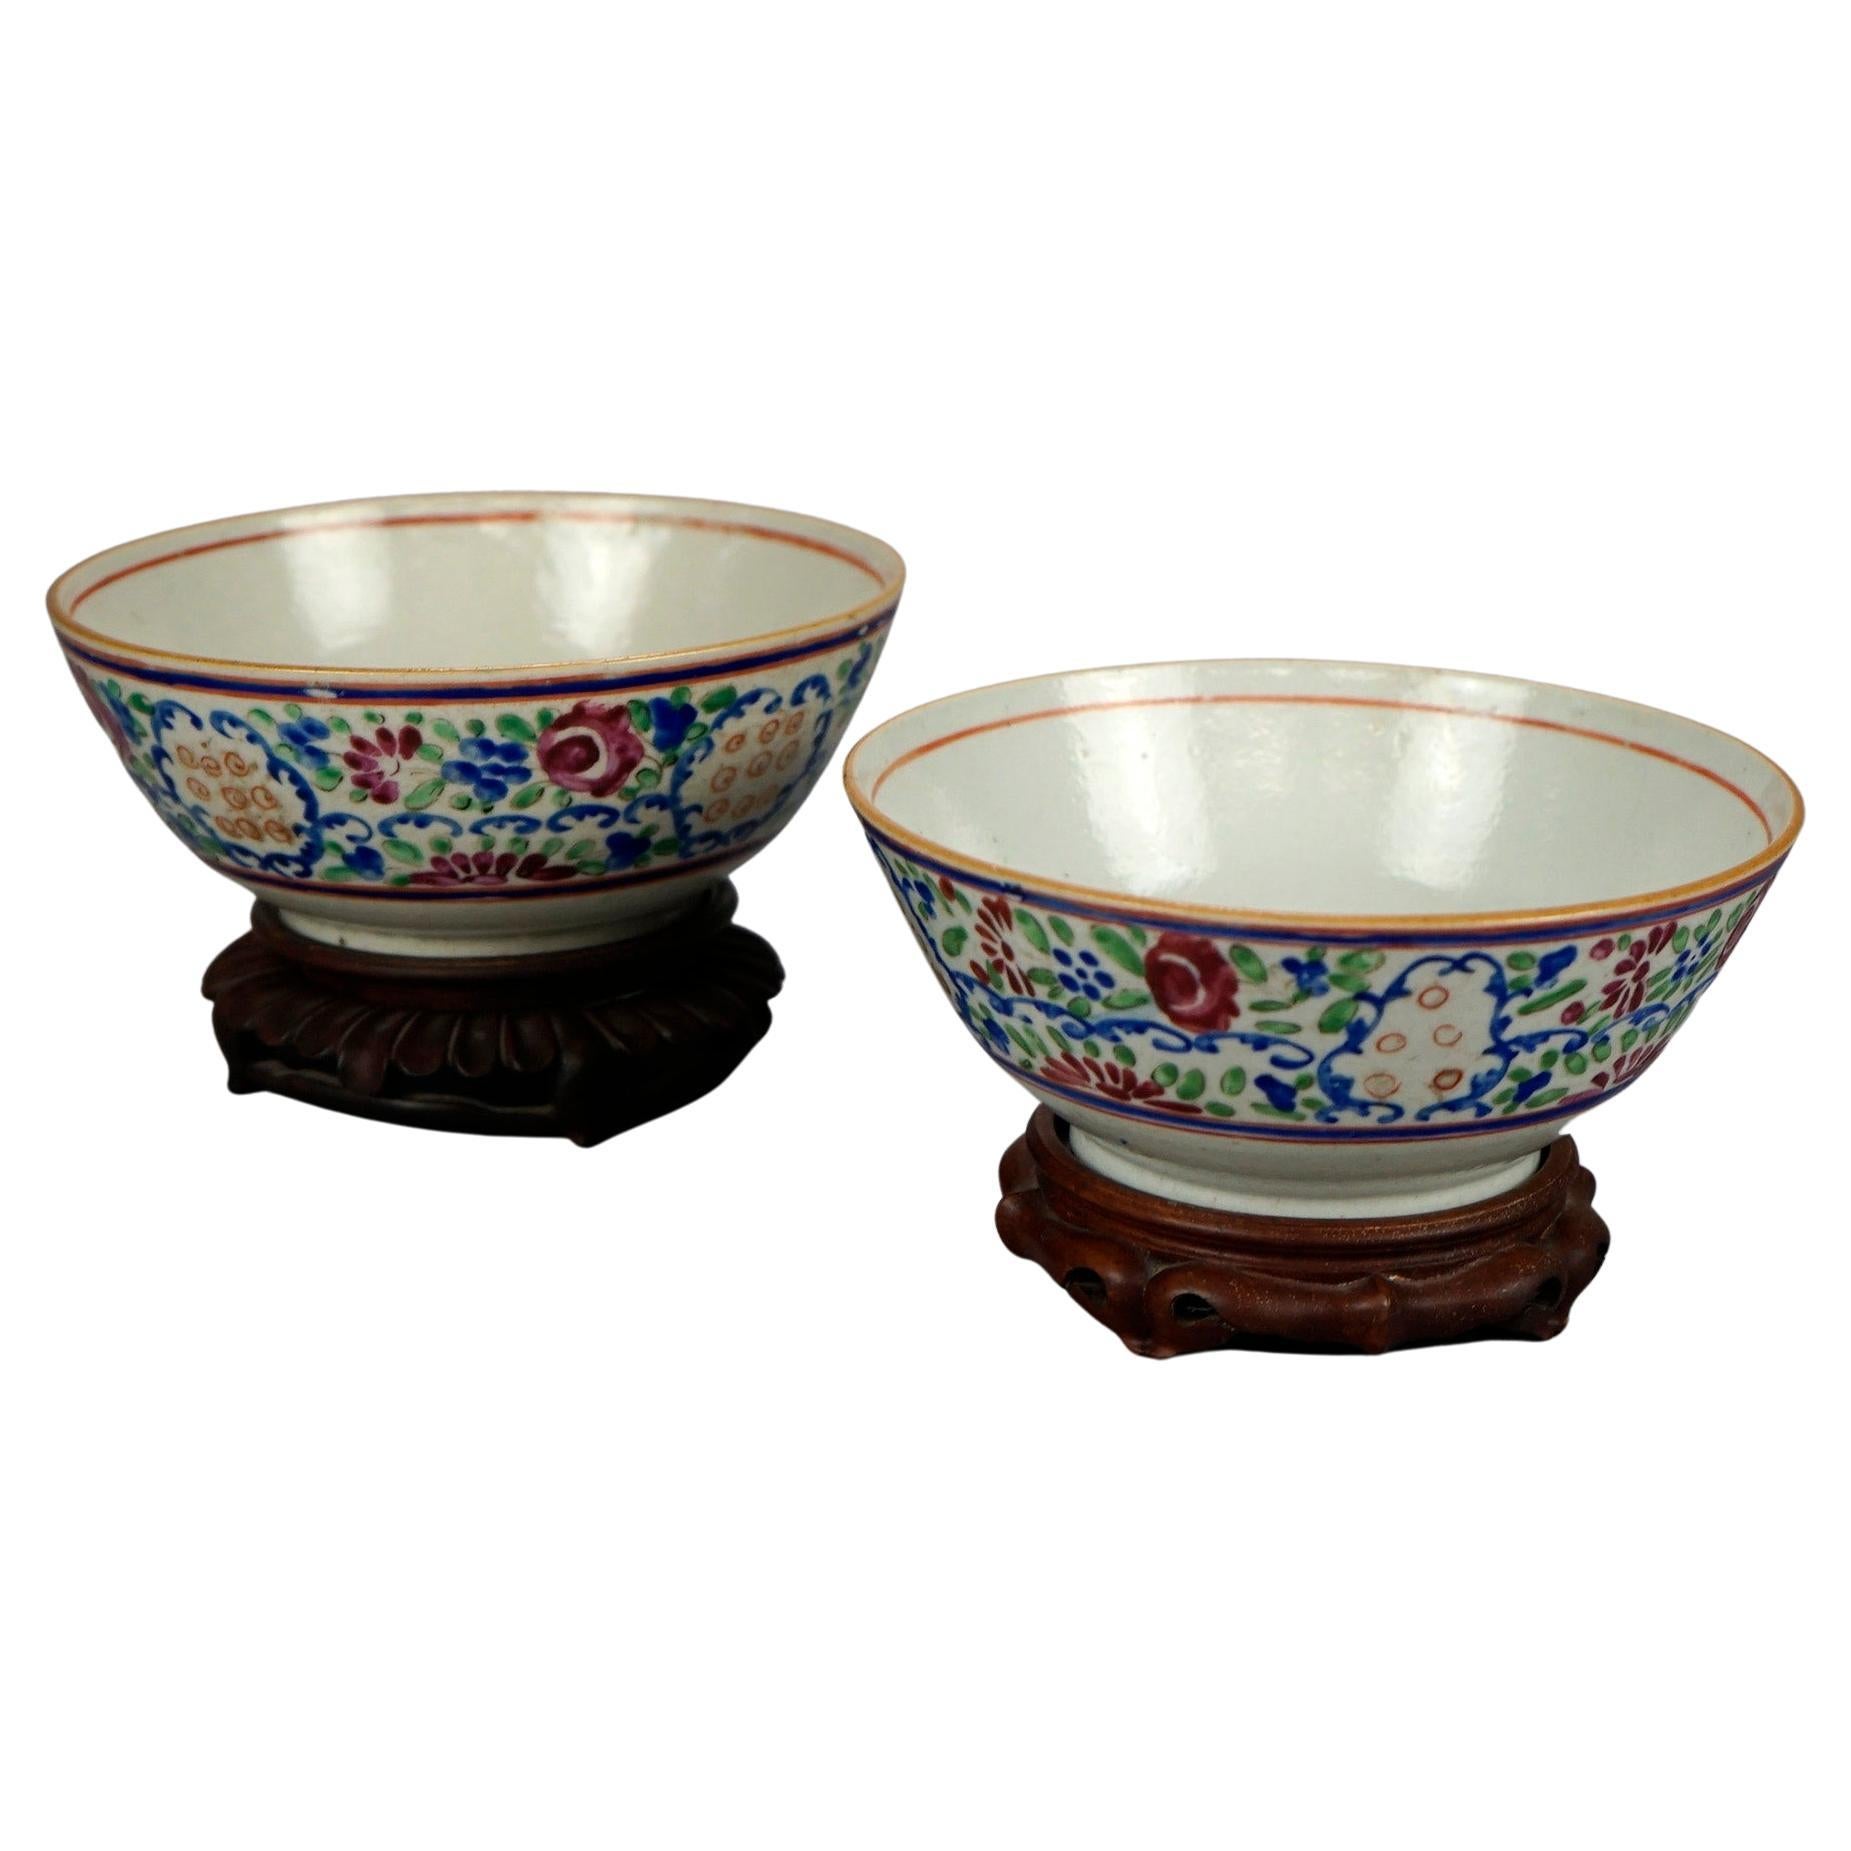 A pair of antique Chinese rice bowls offer porcelain construction with hand painted floral design and raised on carved hardwood stands, 19th century

Measures- 4.25''H x 6.75''W x 6.75''D (base 1.25''H x 4.5''W x 4.5''D).
 